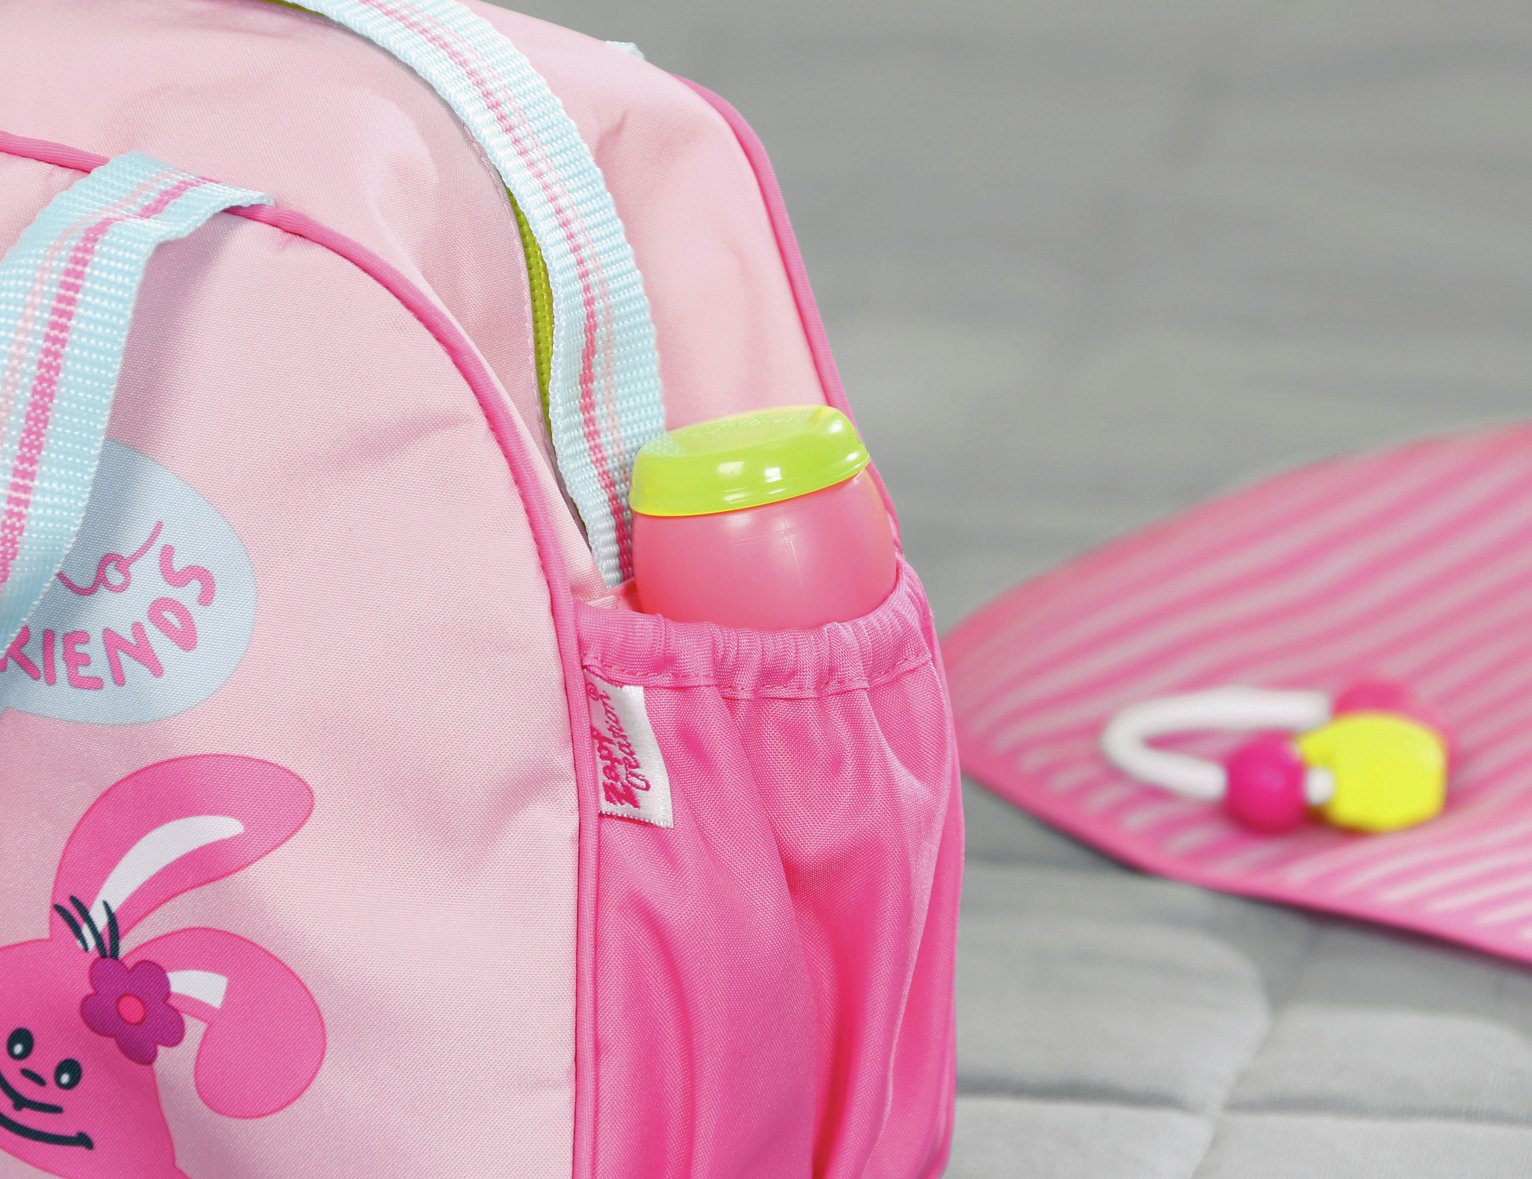 baby alive backpack